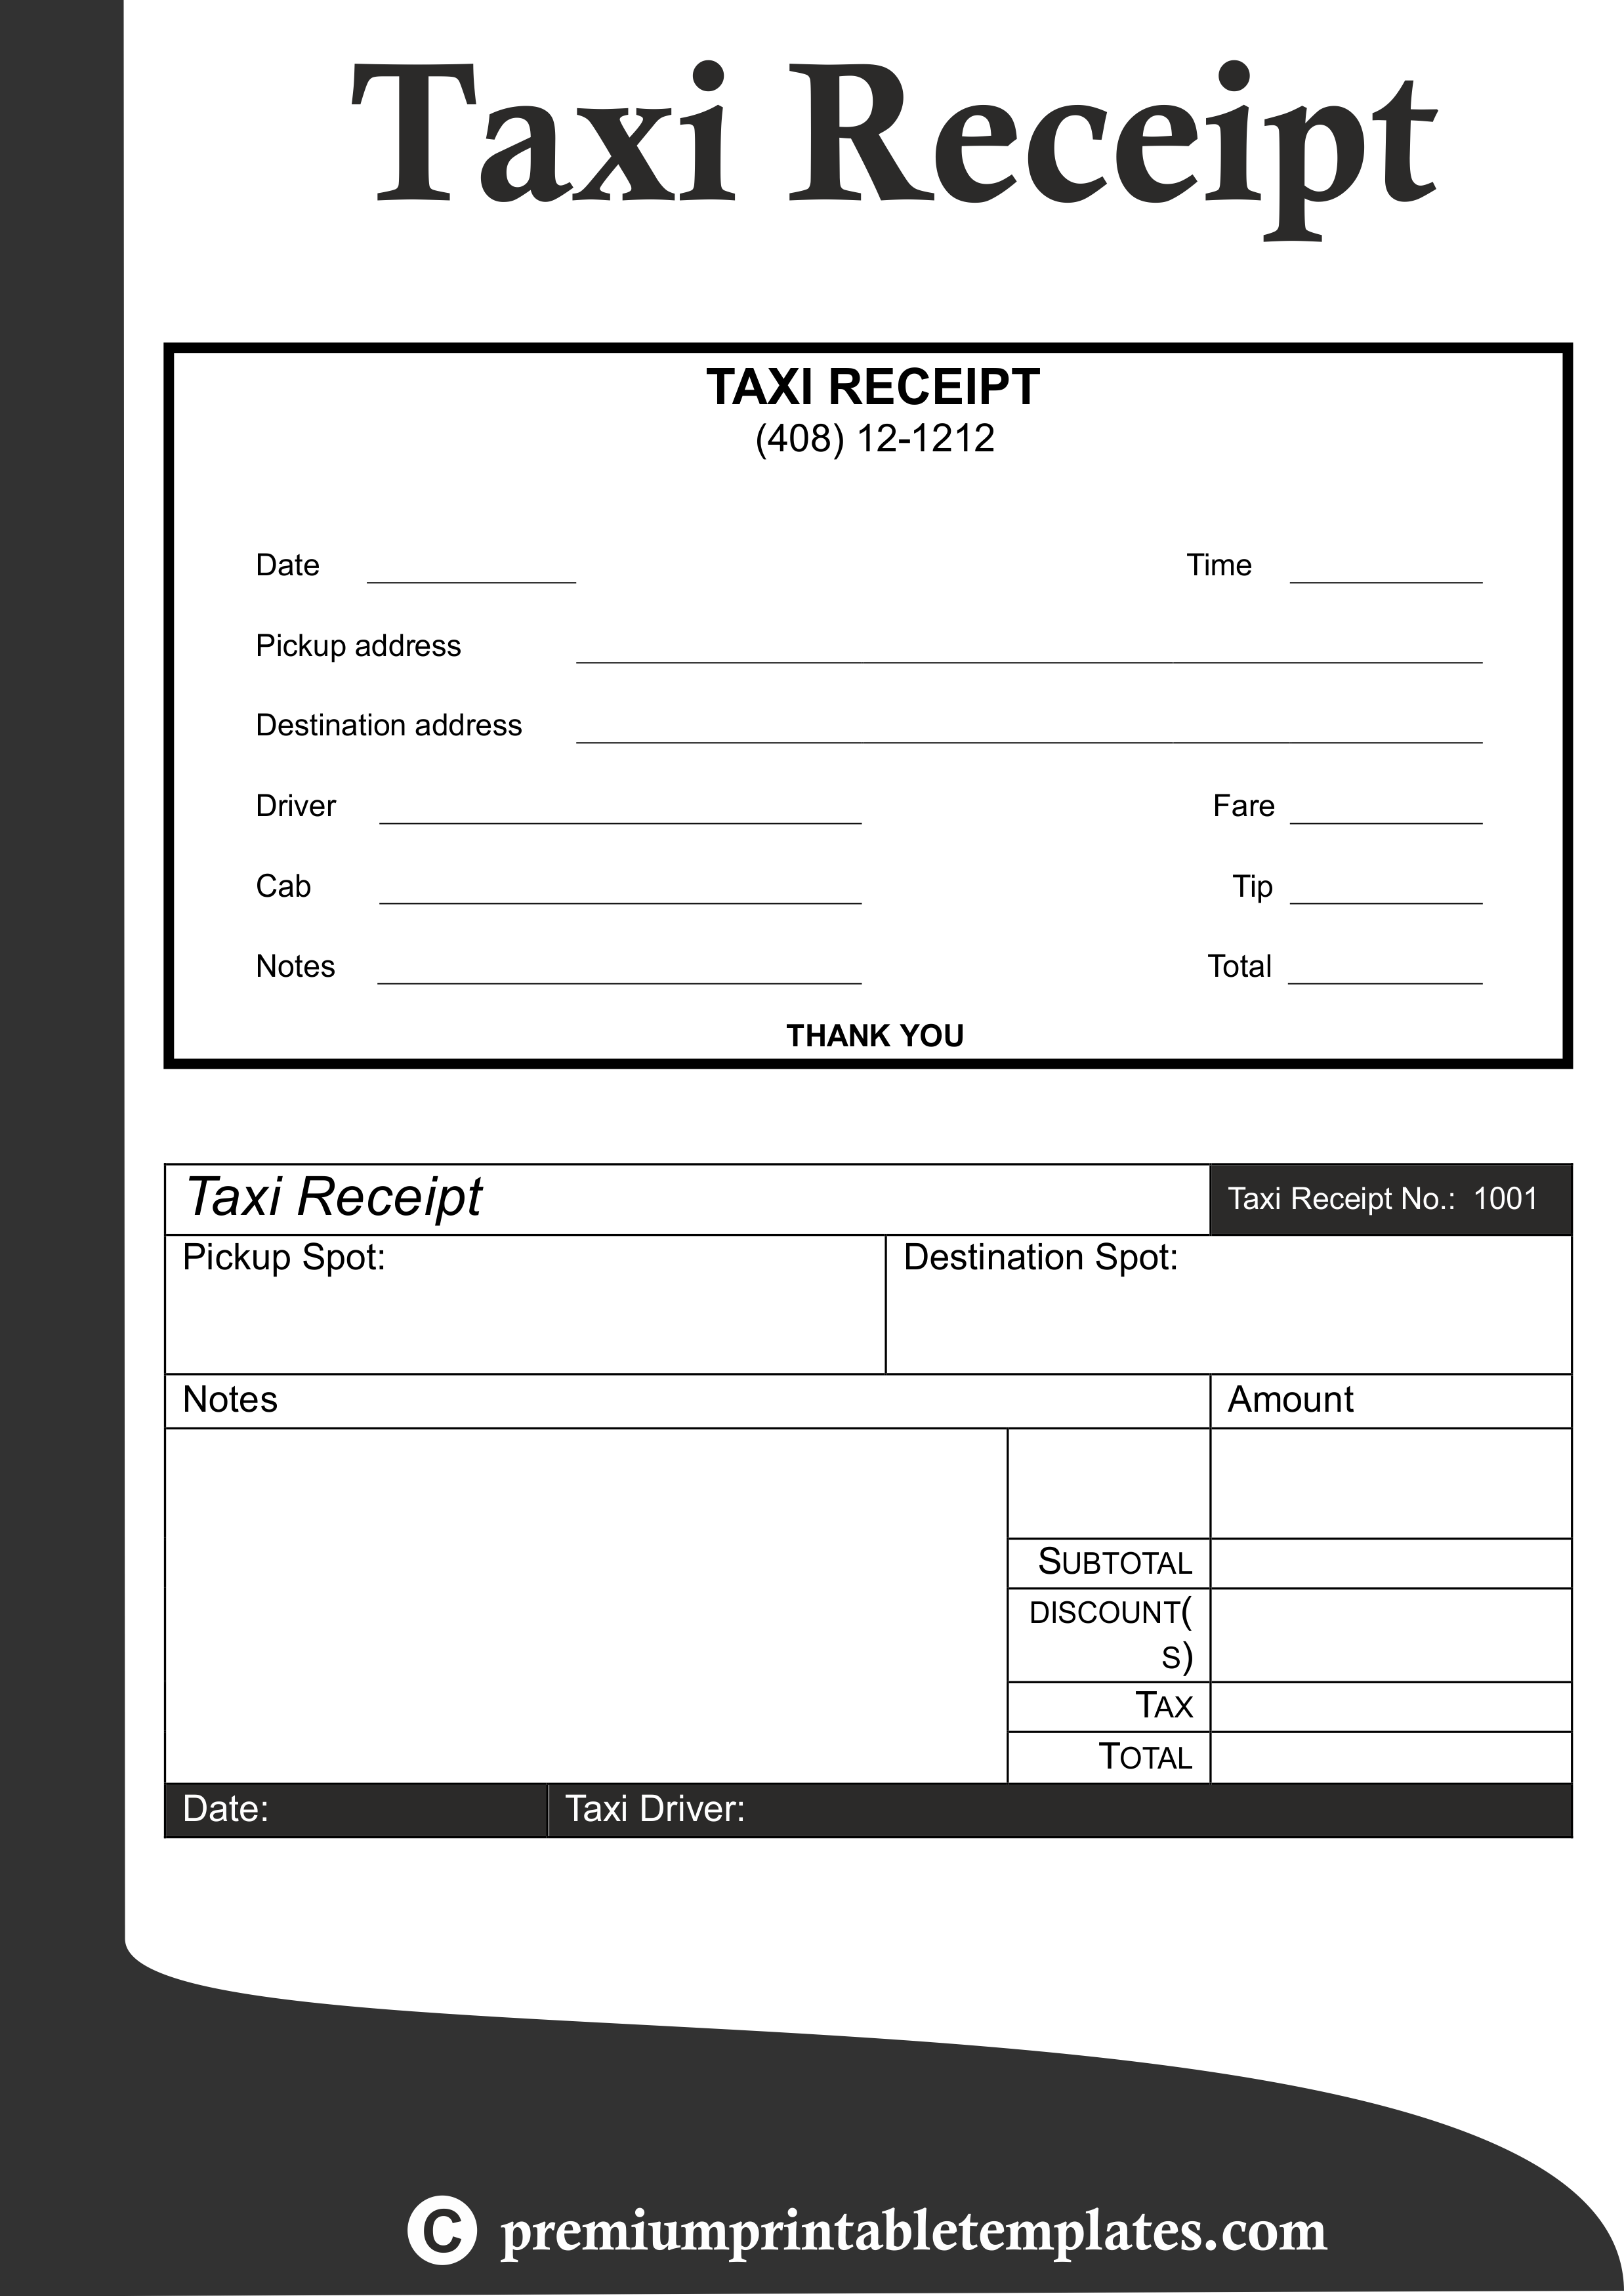 Taxi Receipt Template Chicago